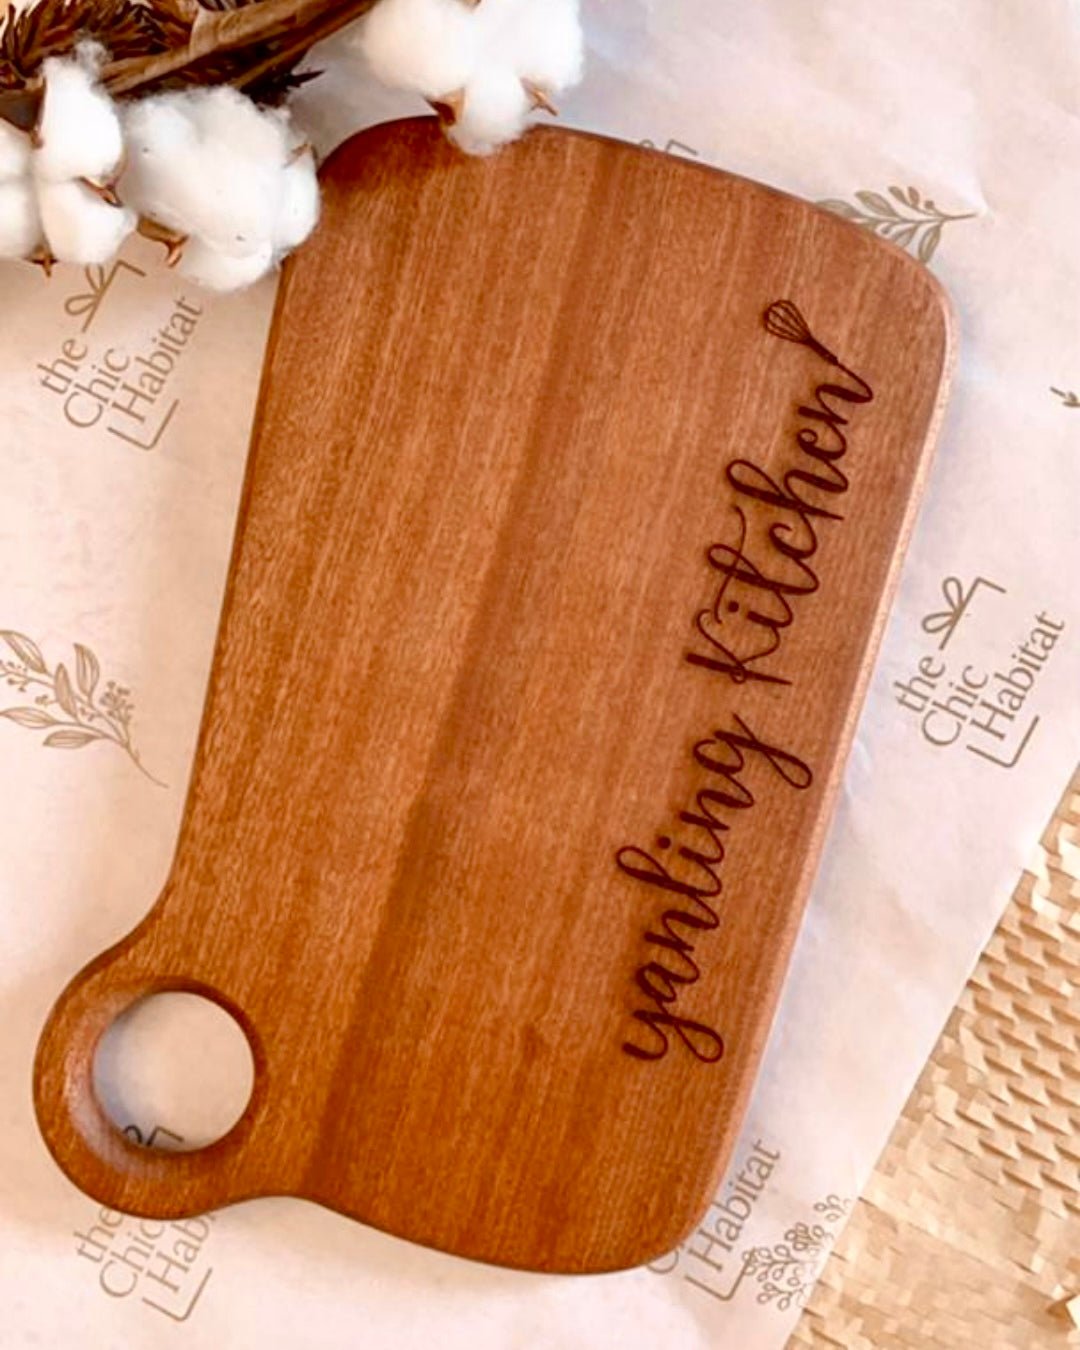 Engraved serving board made from ebony wood with personalized name perfect as wedding gift or housewarming gift